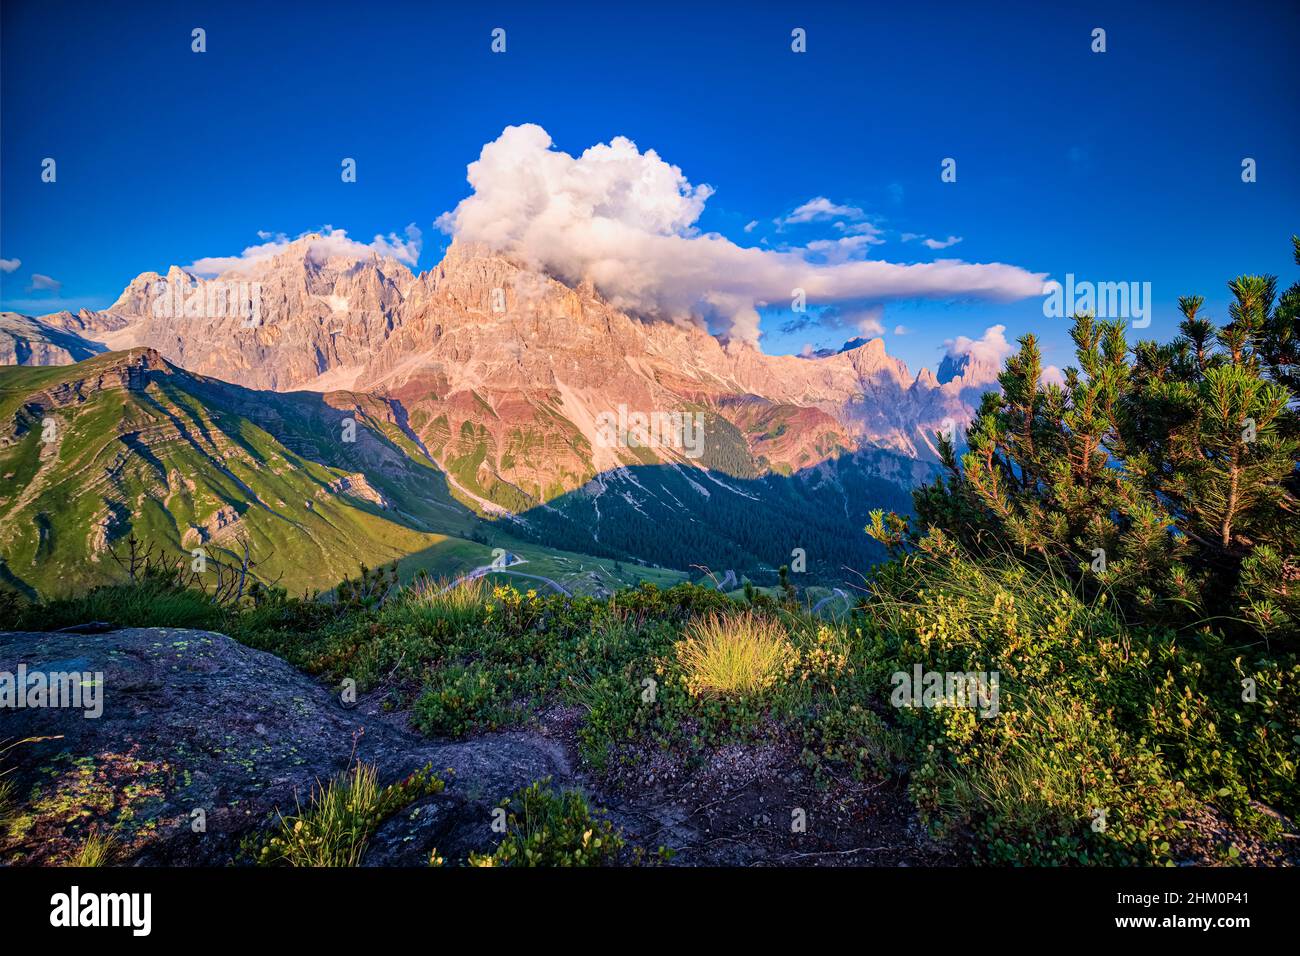 Summits and rock faces of the Pala group, Cimon della Pala, one of the main summits, covered in clouds, at sunset. Stock Photo